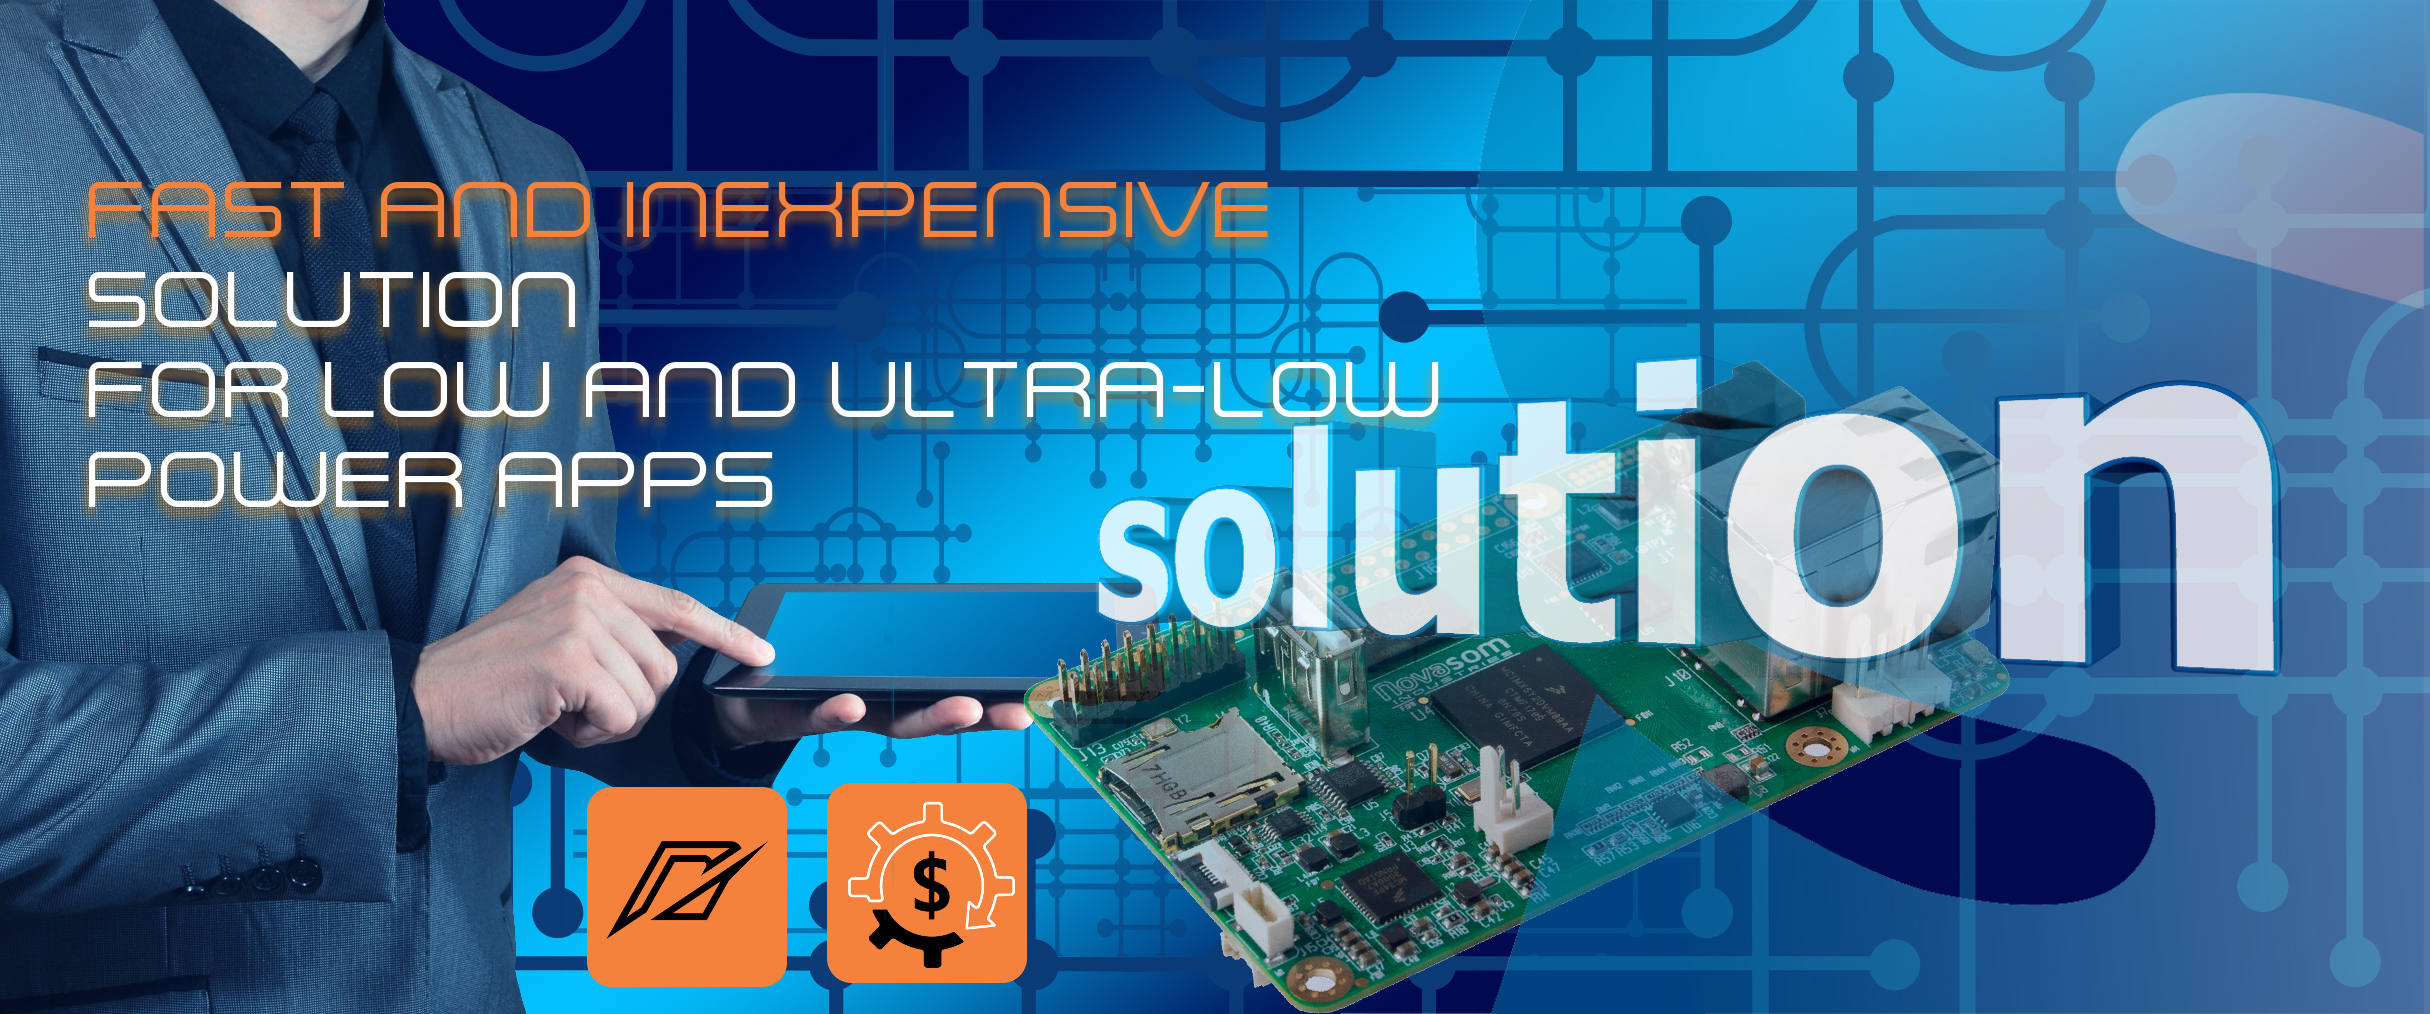 U5 - Fast & inexpensive solution, not just a board… A solution